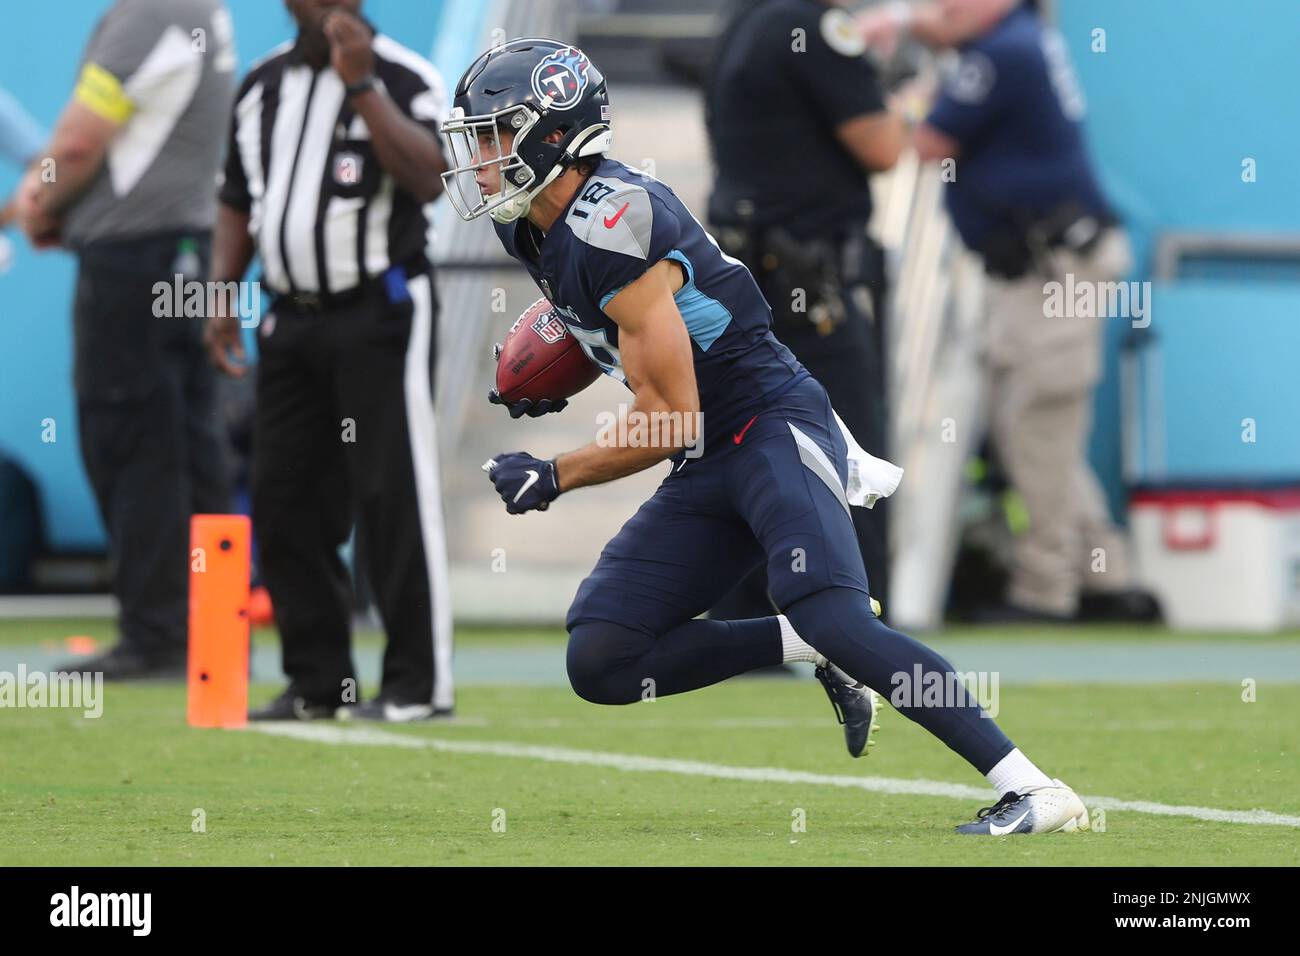 NASHVILLE, TN - AUGUST 20: Tennessee Titans wide receiver Kyle Phillips  (18) returns a kick-off during the Tampa Bay Buccaneers-Tennessee Titans  Preseason game on August 20, 2022 at Nissan Stadium in Nashville,